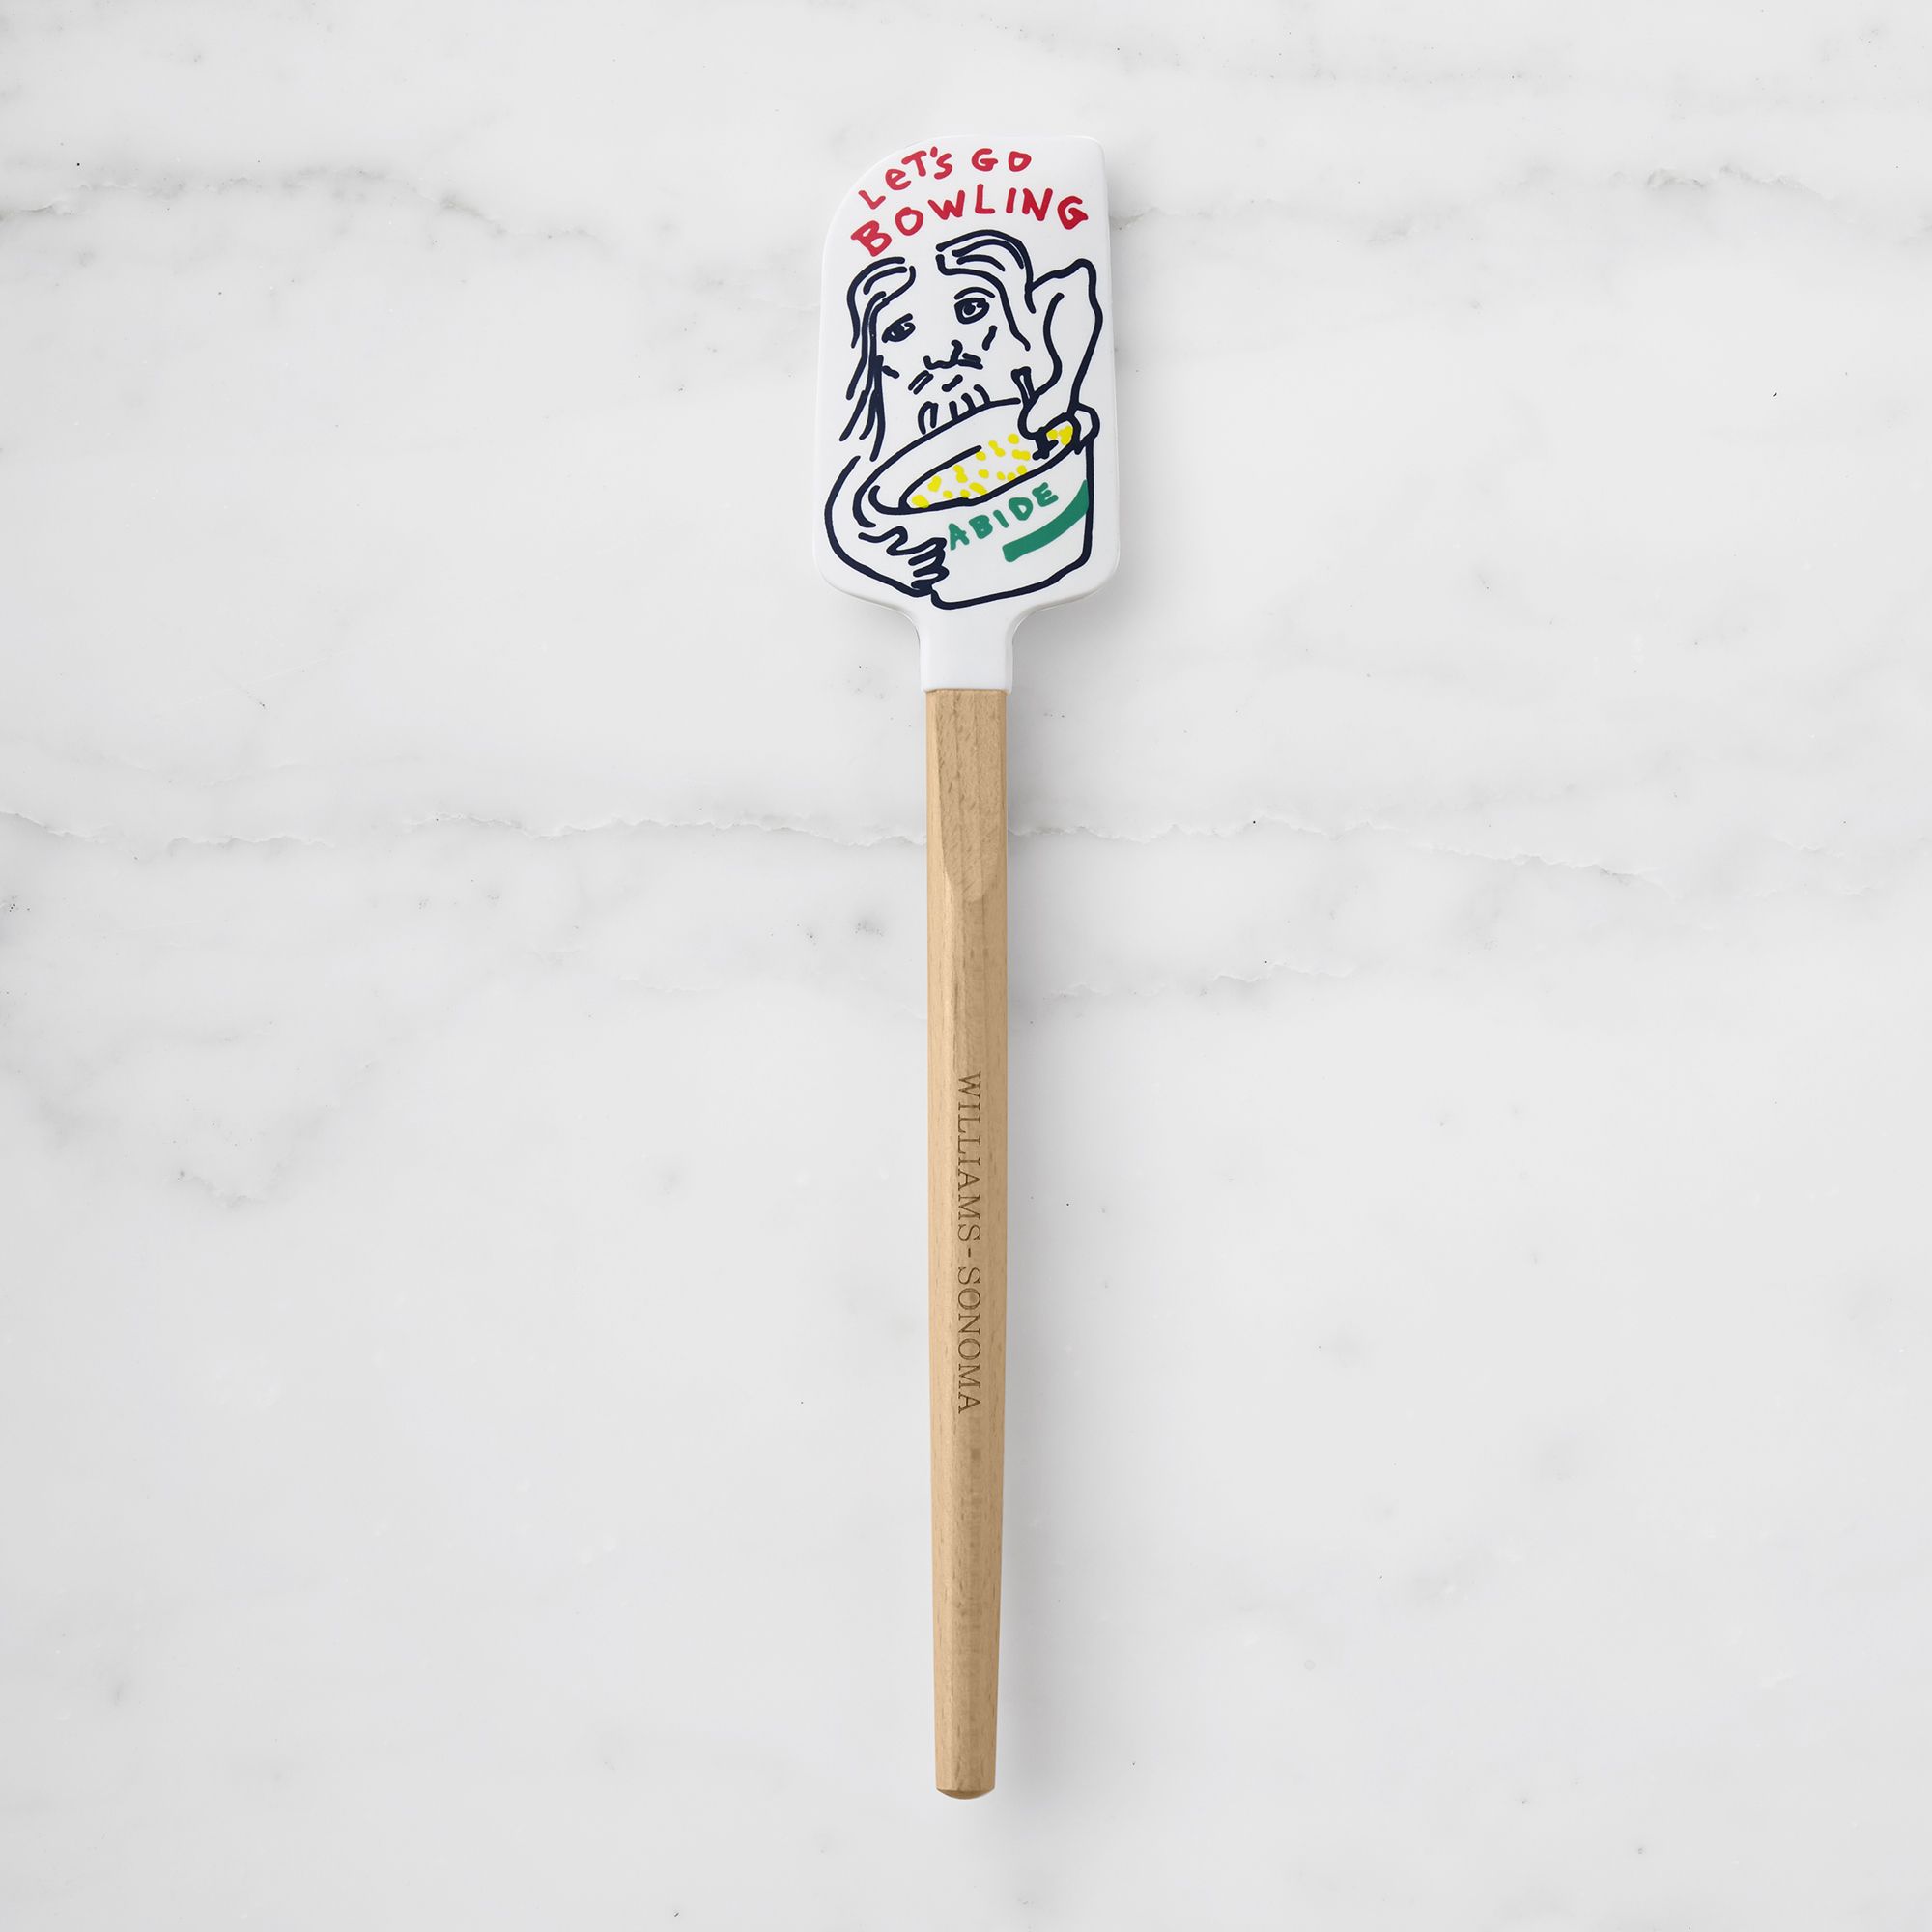 Williams Sonoma - Our Williams Sonoma x No Kid Hungry spatula collection is  HERE! 🧡 Which celebrity-designed spatula is your favorite? 30% of the  retail price benefits No Kid Hungry's fight to